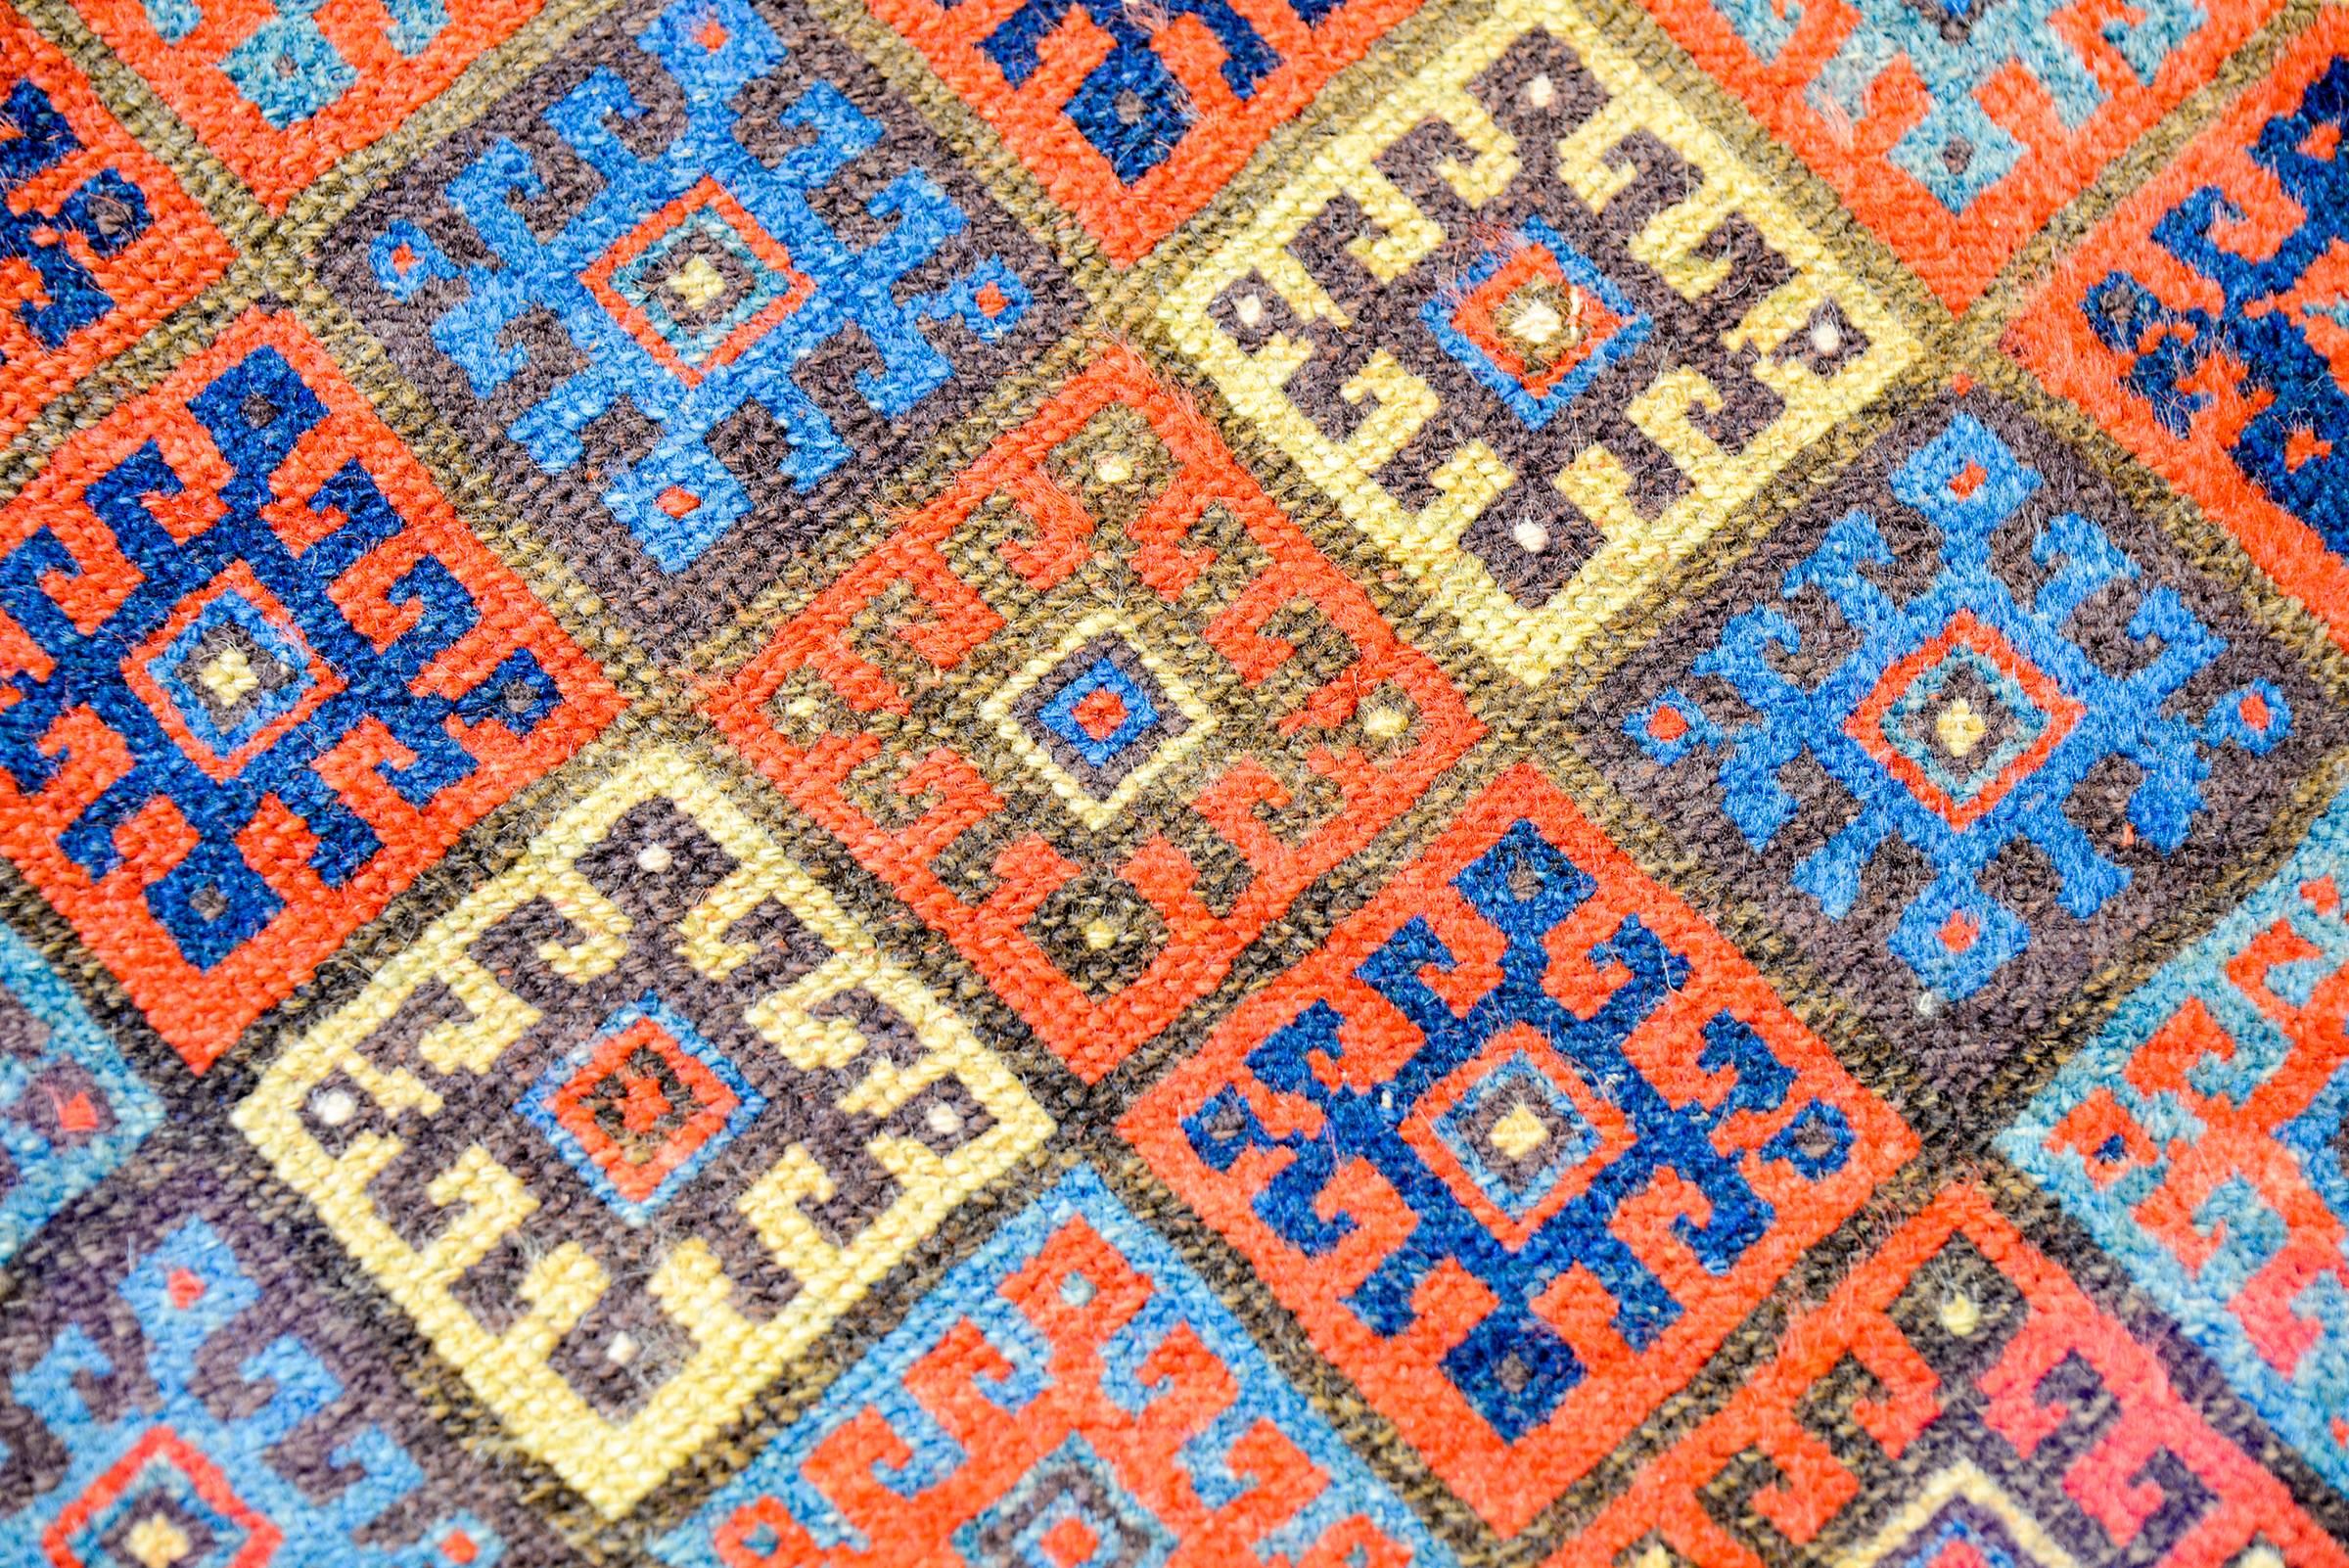 An exceptional late 19th century Persian Kurdish bag face rug with a wonderful pattern containing multiple diamonds with geometric forms woven in crimson, light and dark indigo, and yellow colored wool. The border is complex, with two wide stripes,